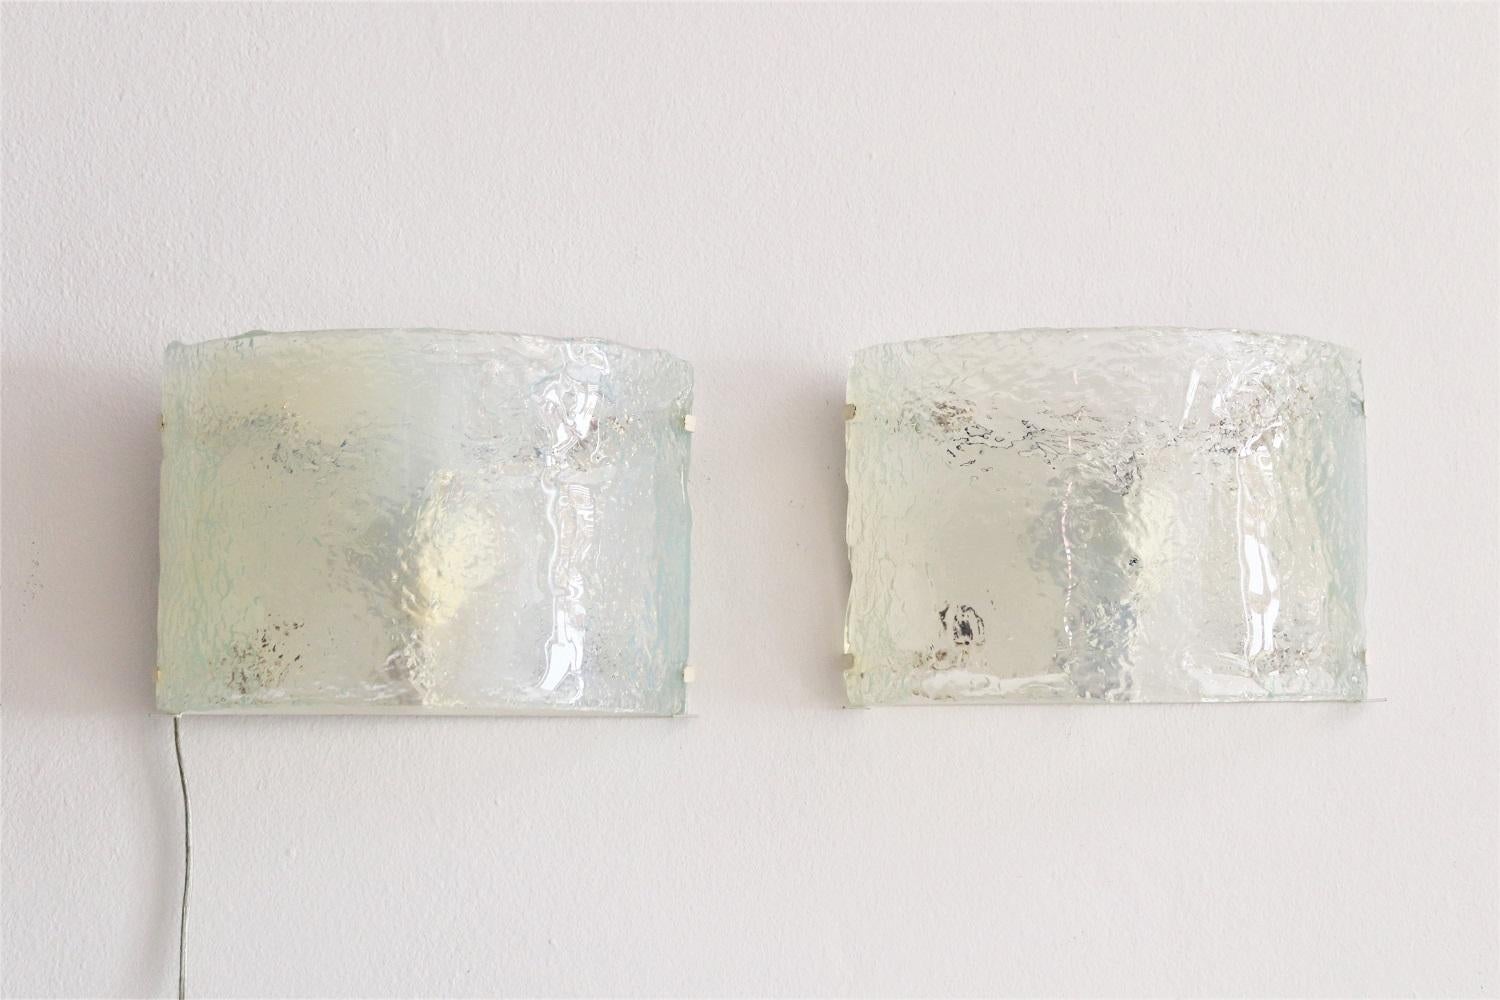 Italian Midcentury Wall Sconces in Opaline Murano Glass by Carlo Nason, 1970s For Sale 3